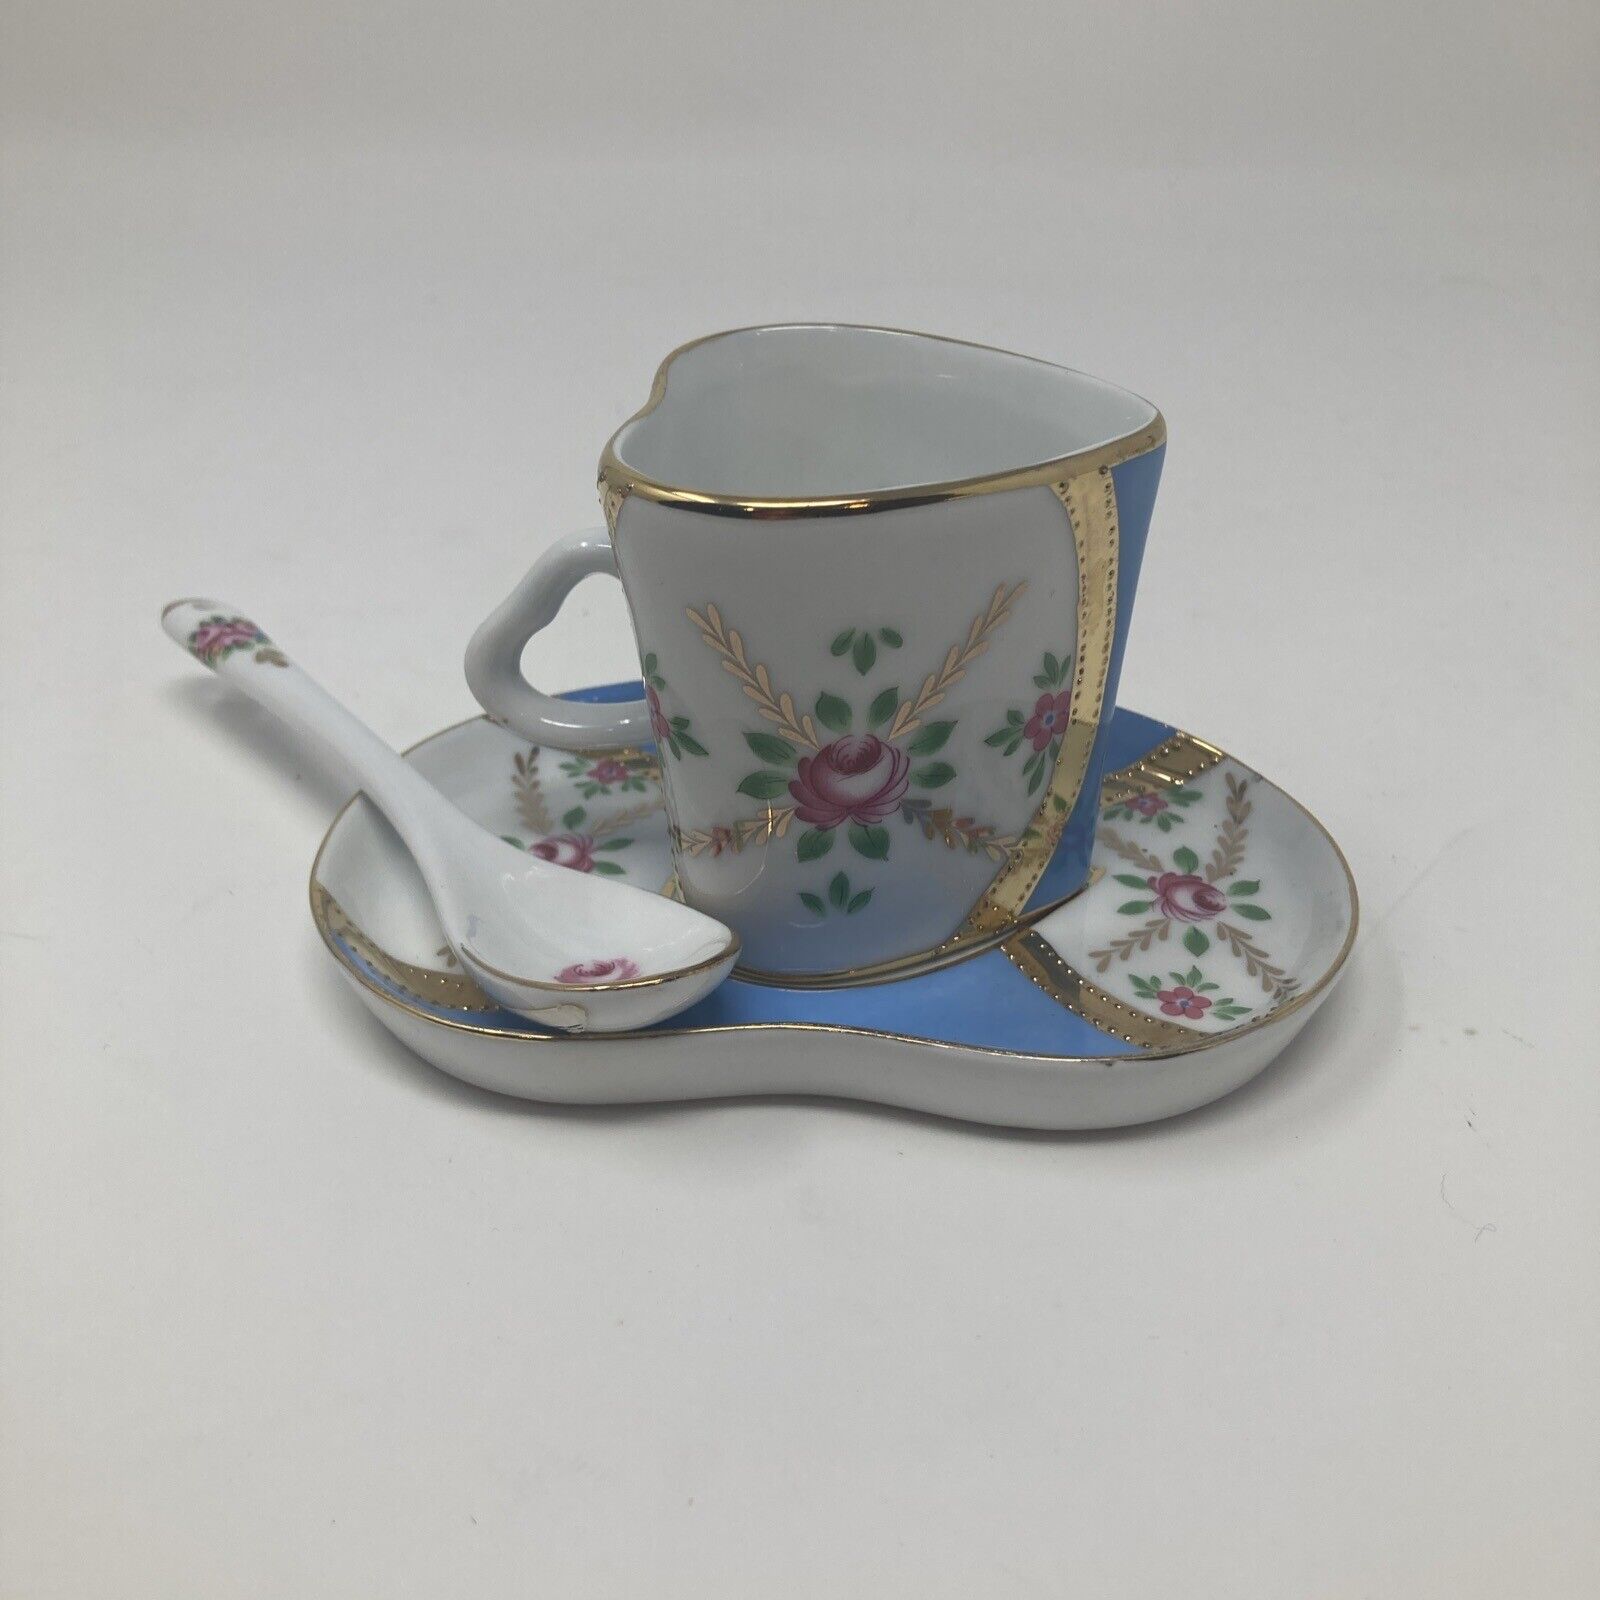 Unbranded Unusual Small Cup, Saucer And Spoon